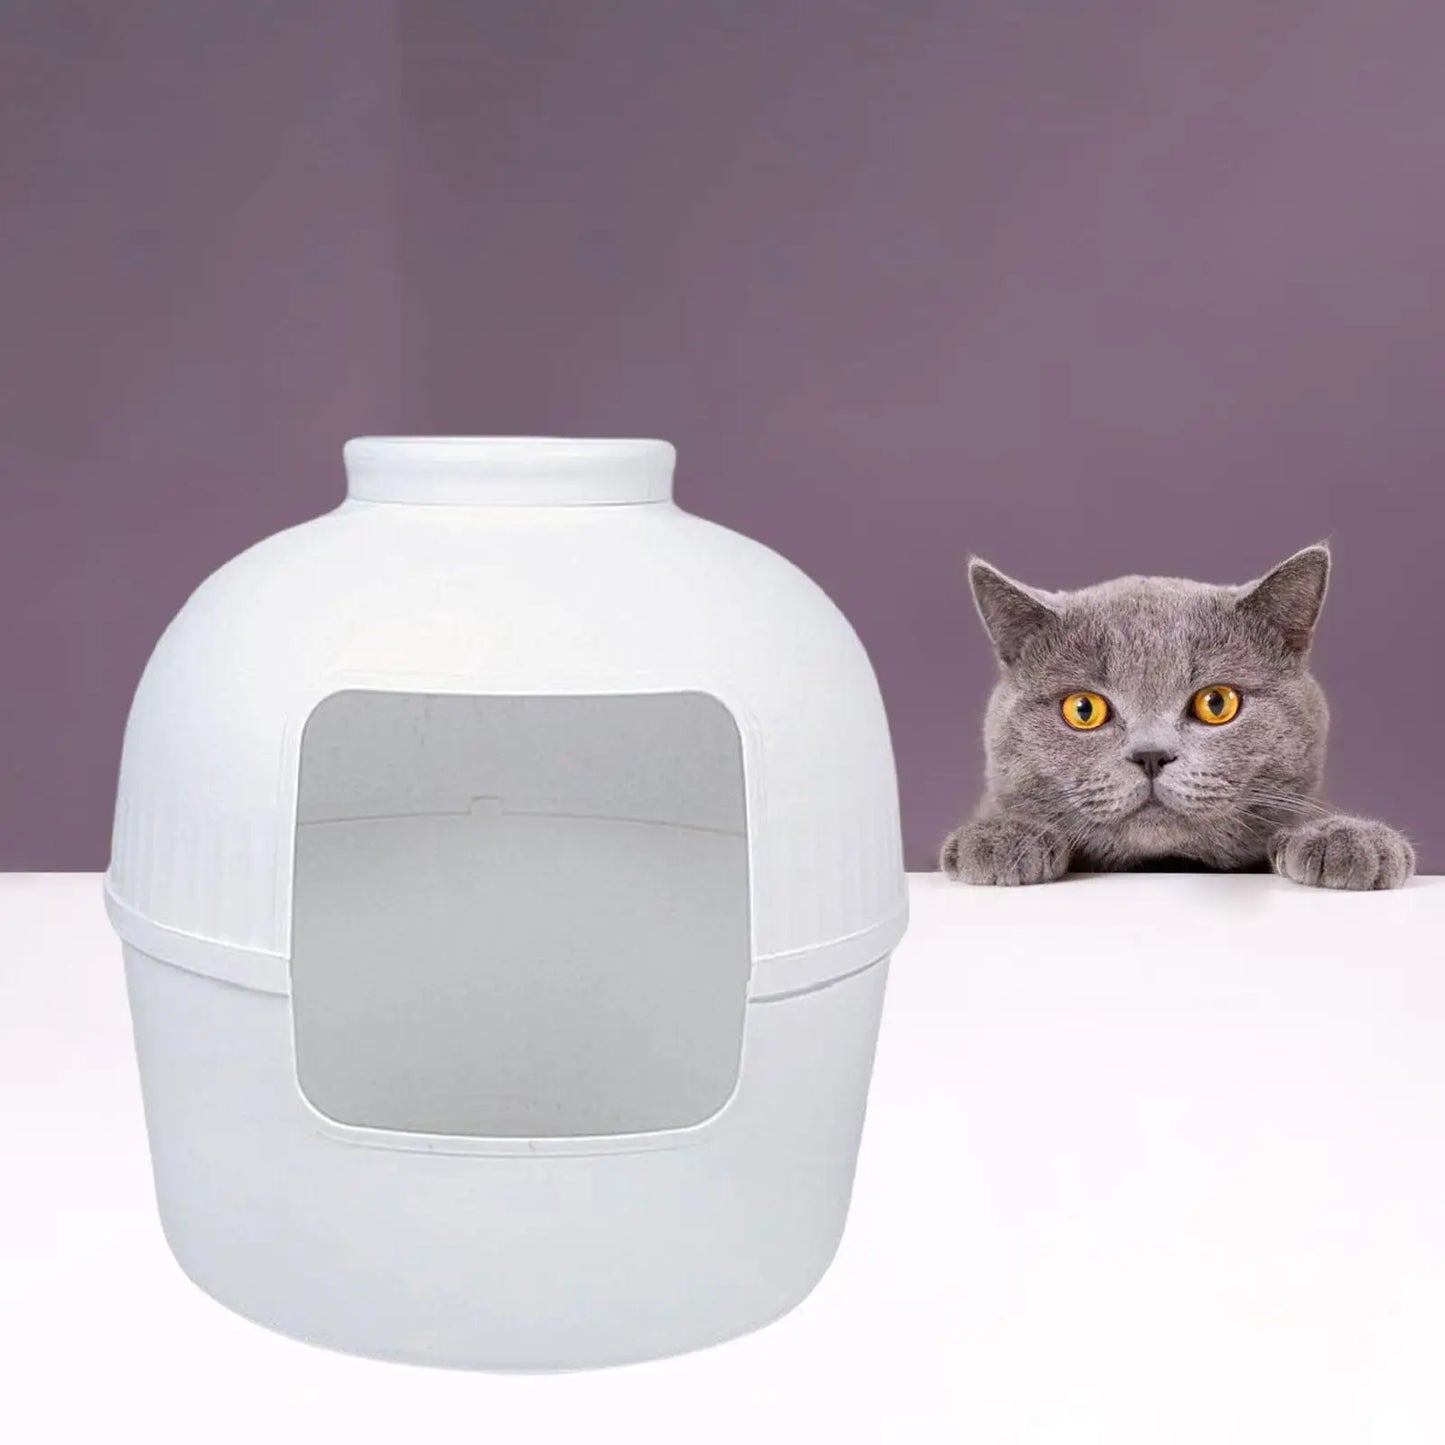 litter Box Plant Litter Boxes Enclosed Cat Litter Box Pet Supplies Cute for Large Cat Small Cat Home Decor Training Gift